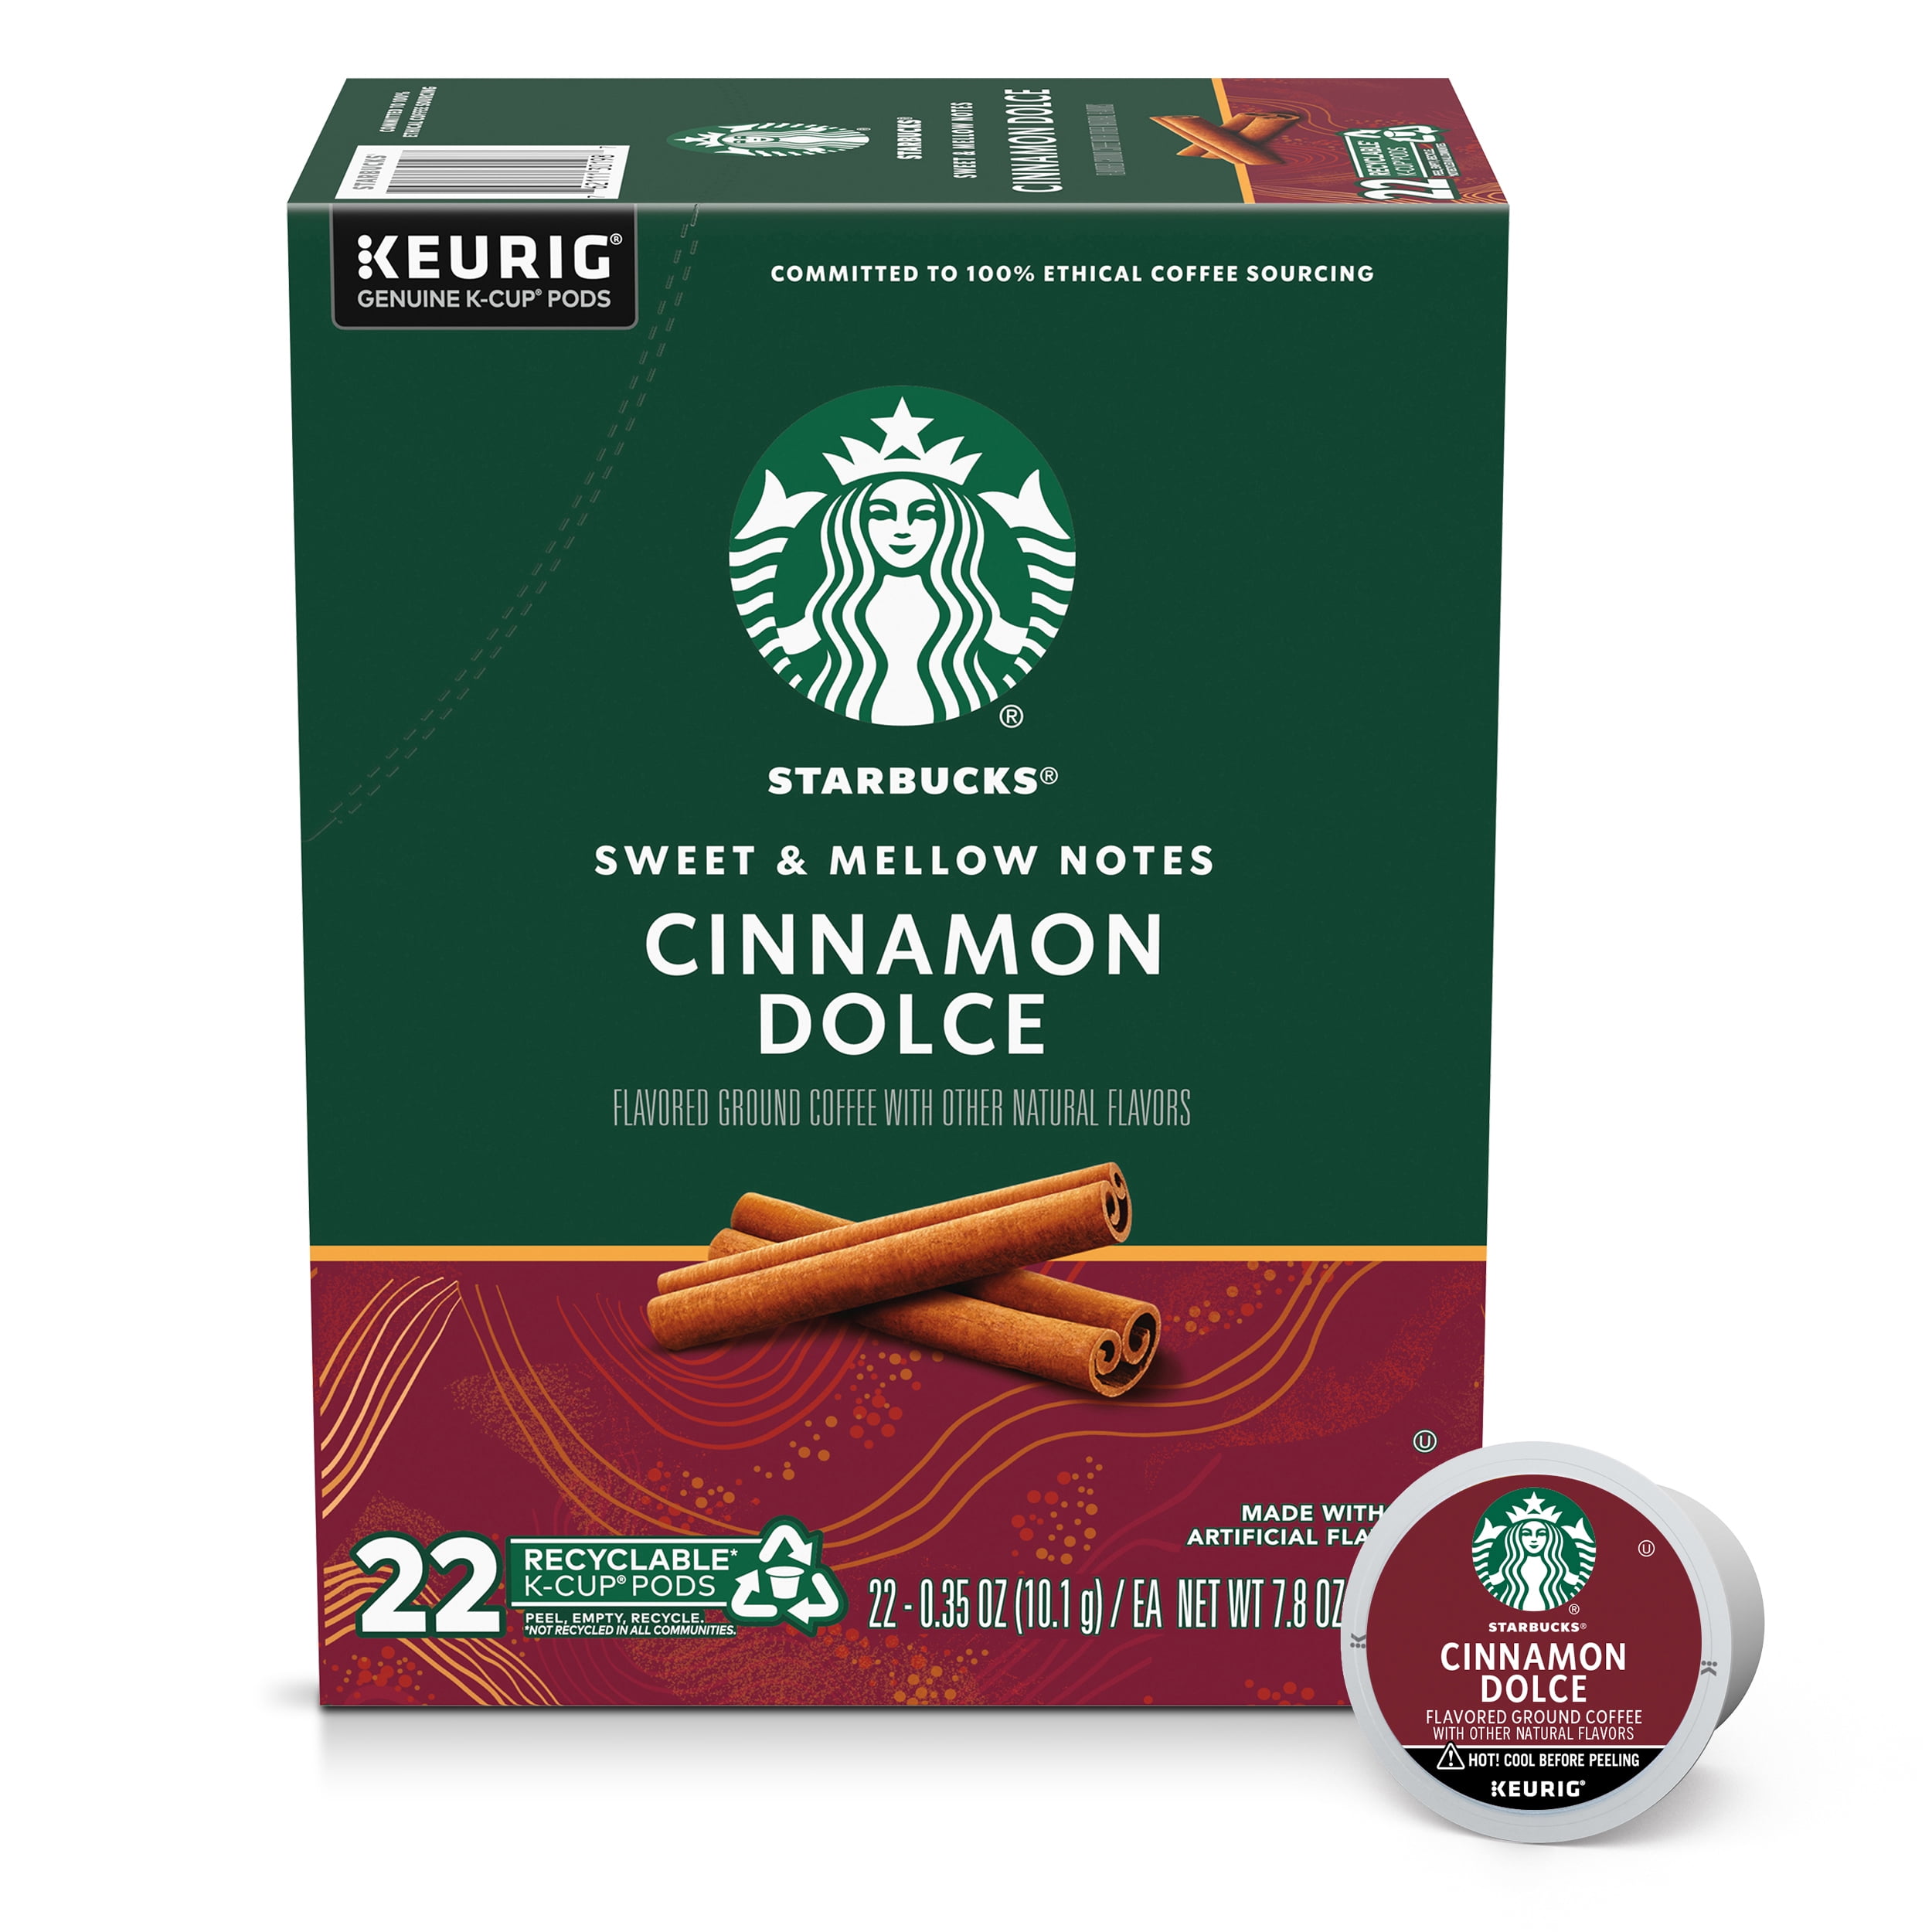 Starbucks Cinnamon Dolce Flavored Coffee, K-Cup Coffee Pods, Naturally Flavored, 22 ct​